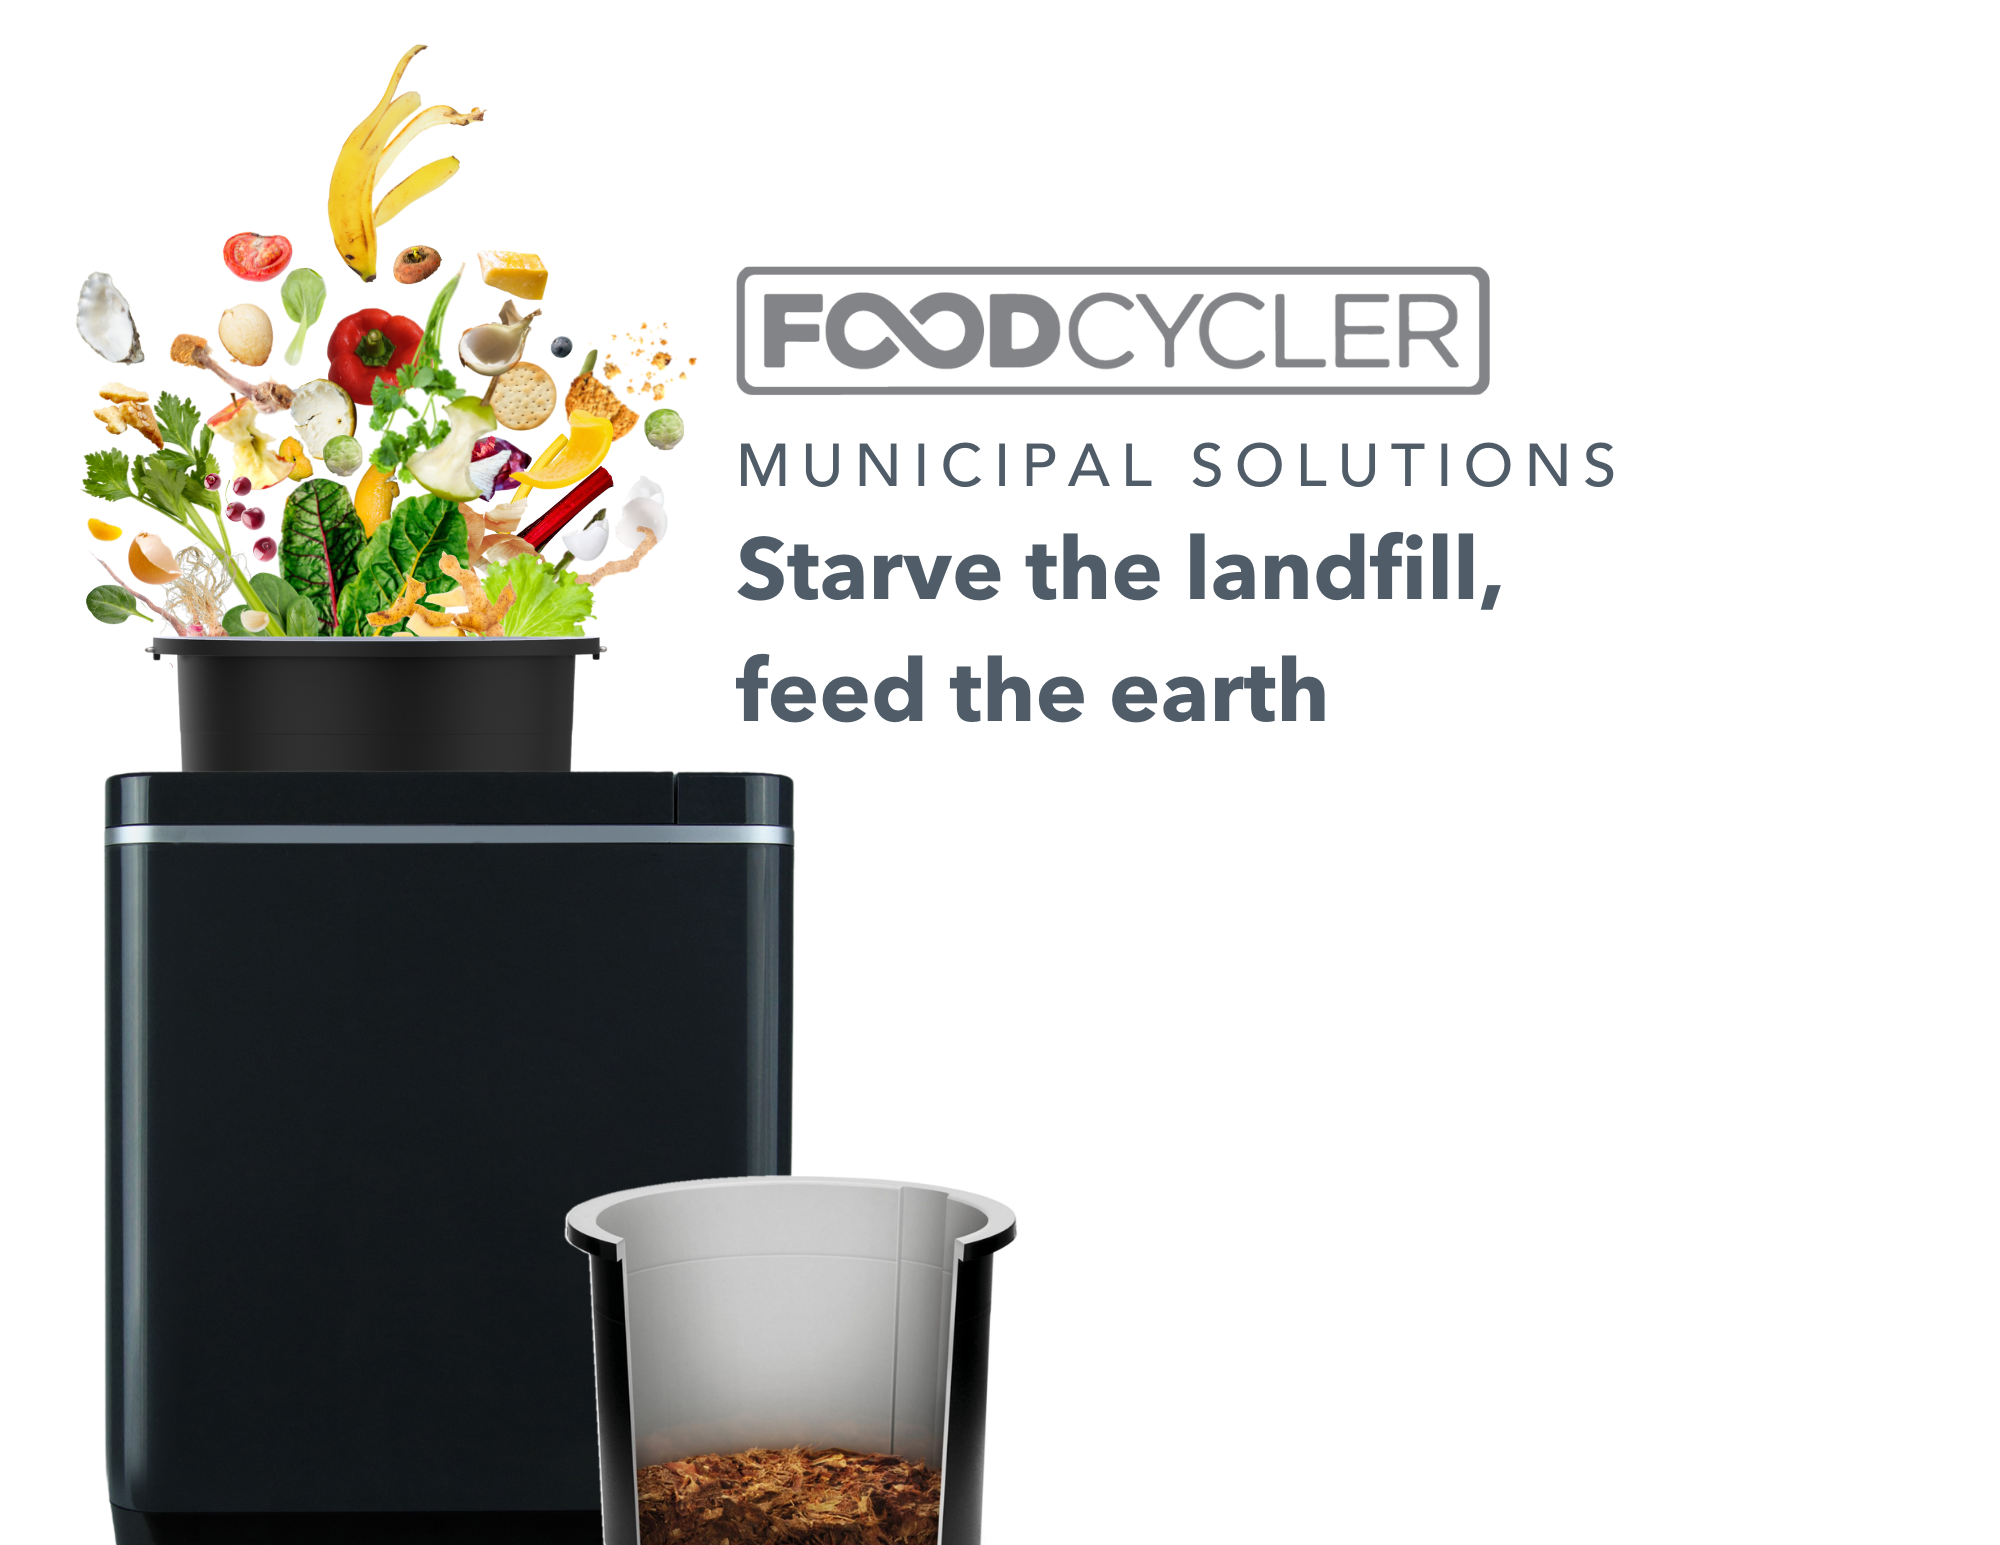 FoodCycler - Starve the landfill, feed the earth